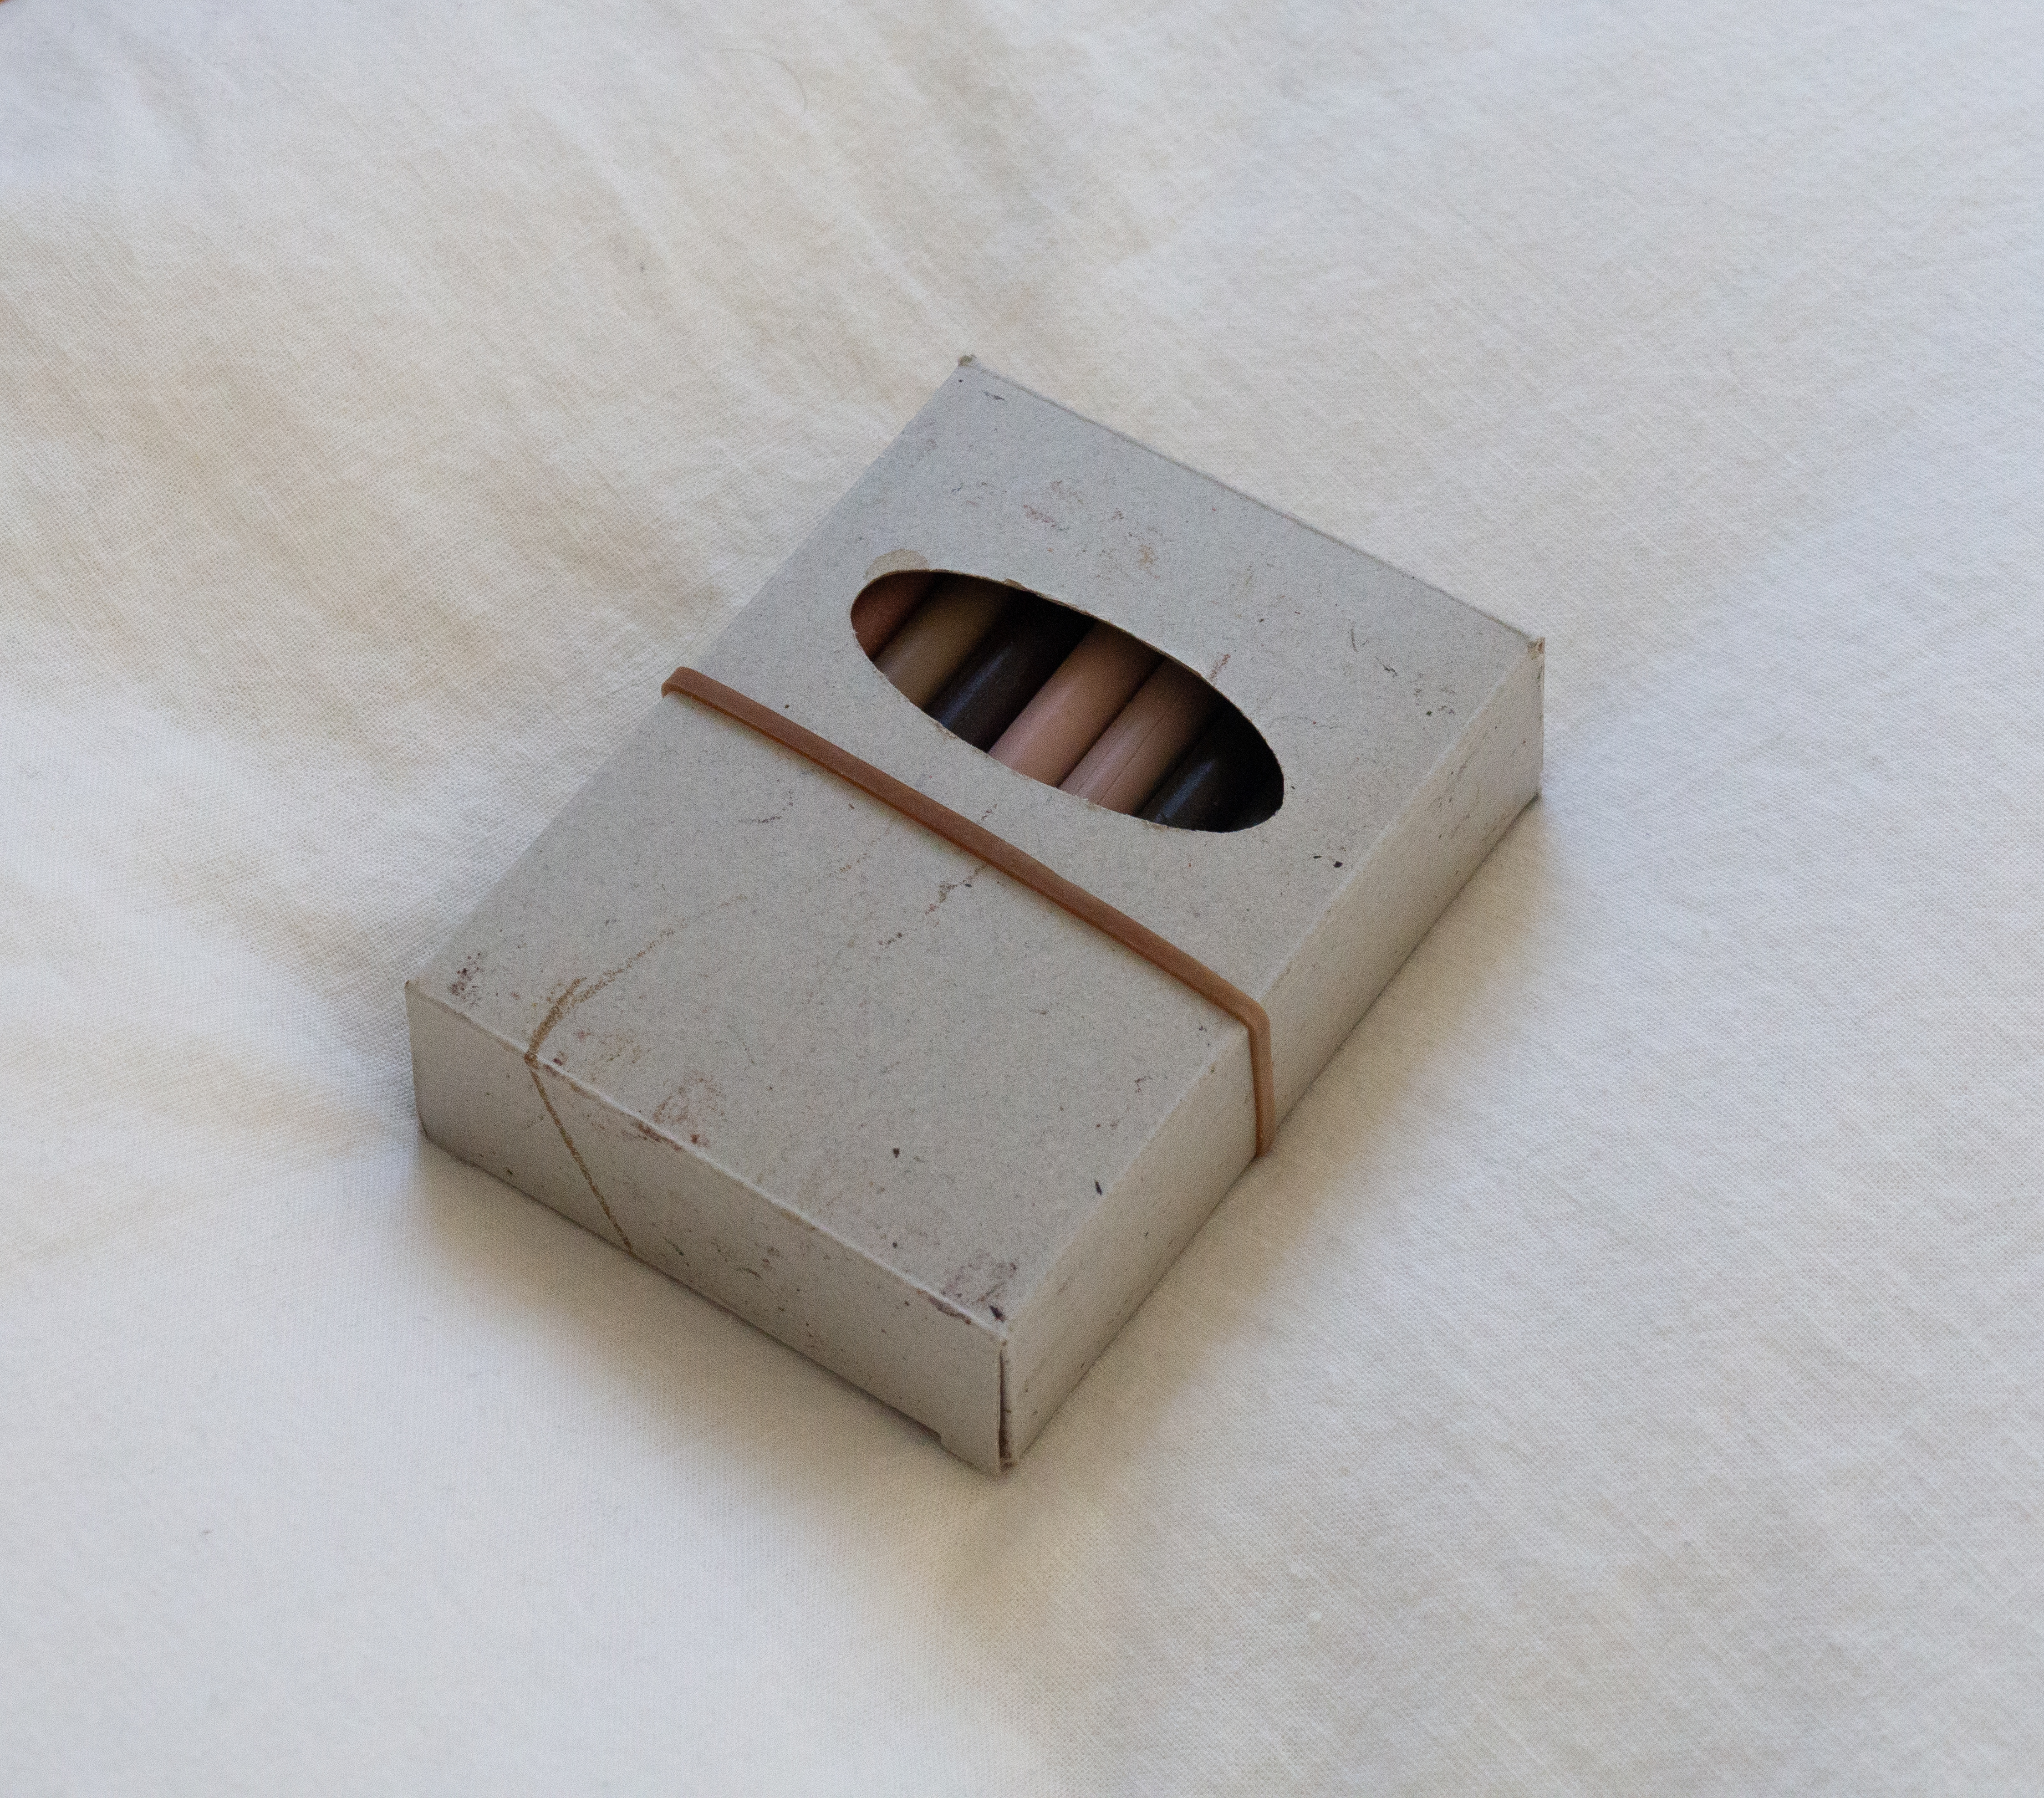 cardboard crayon box without branding, wrapped with a rubber-band, sitting on a white sheet